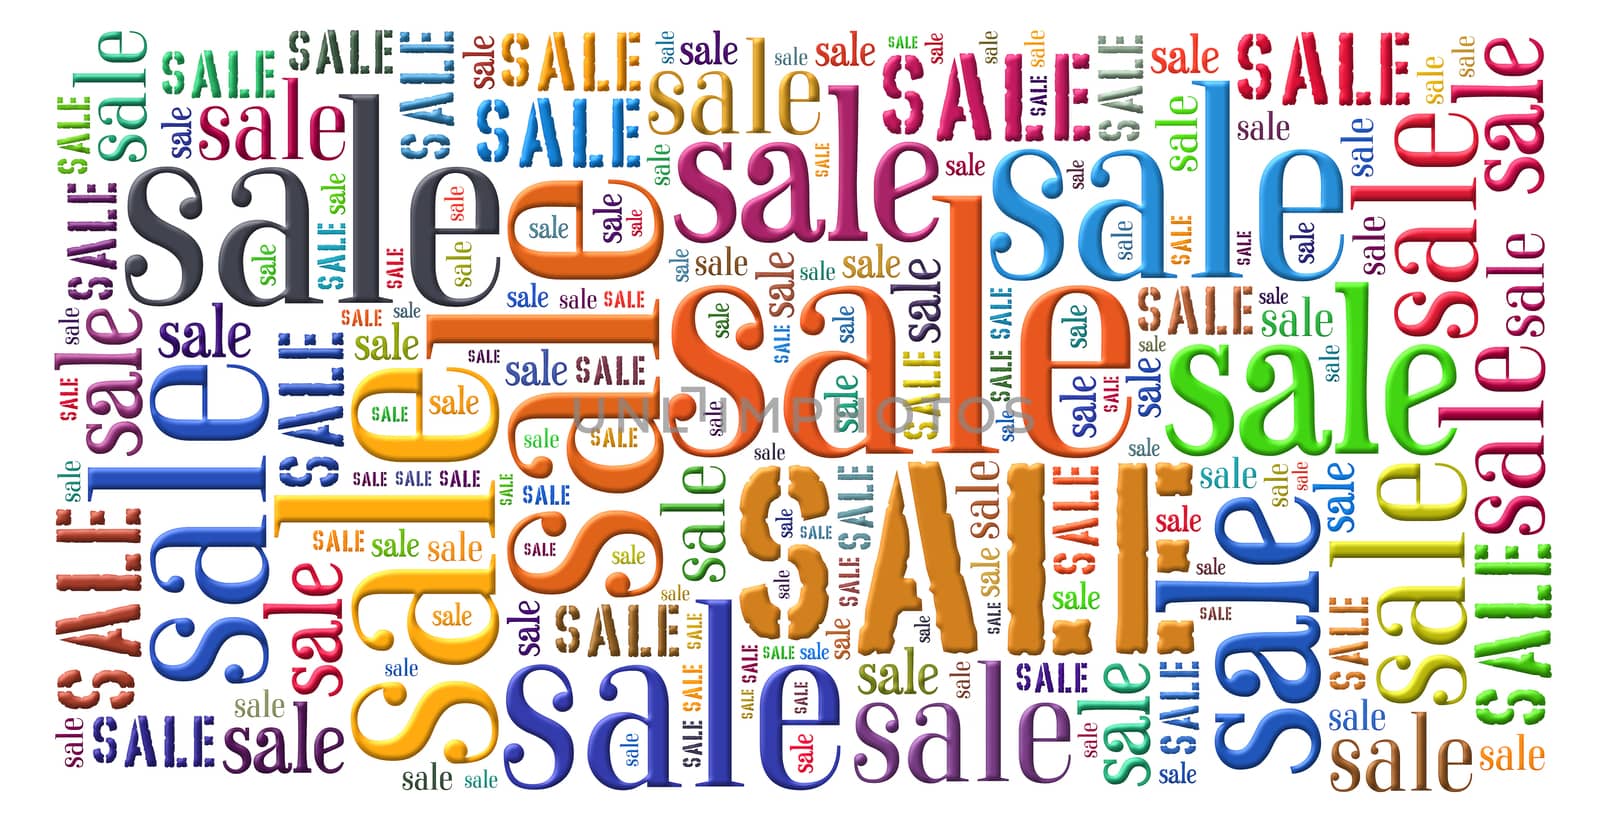 Sale concept  in a colorful  word cloud 